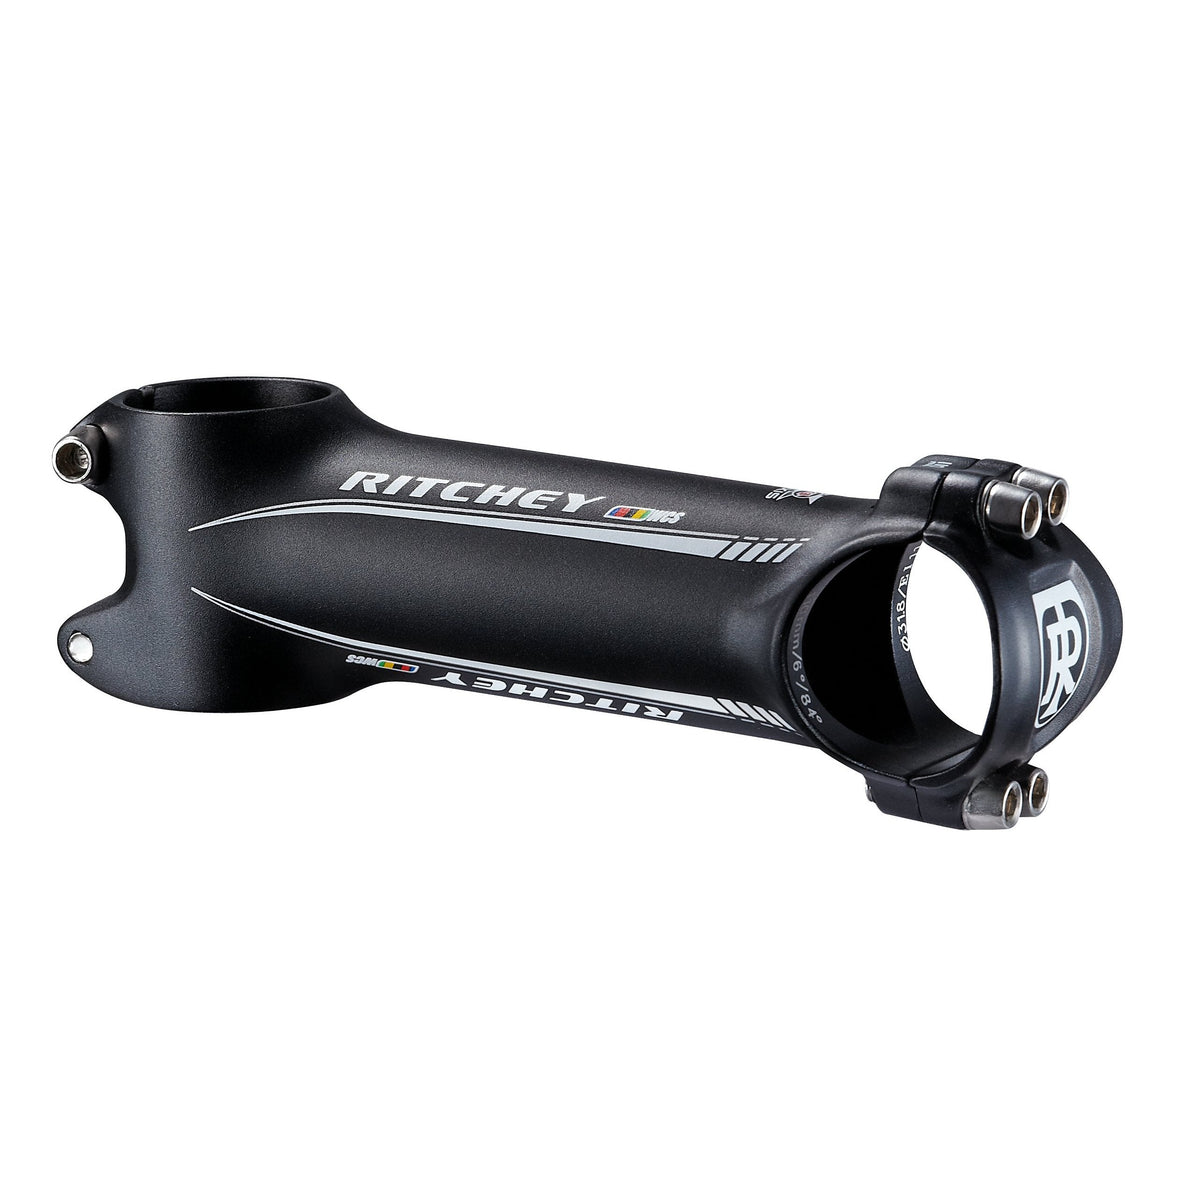 Ritchey WCS 4 Axis Alloy Stem